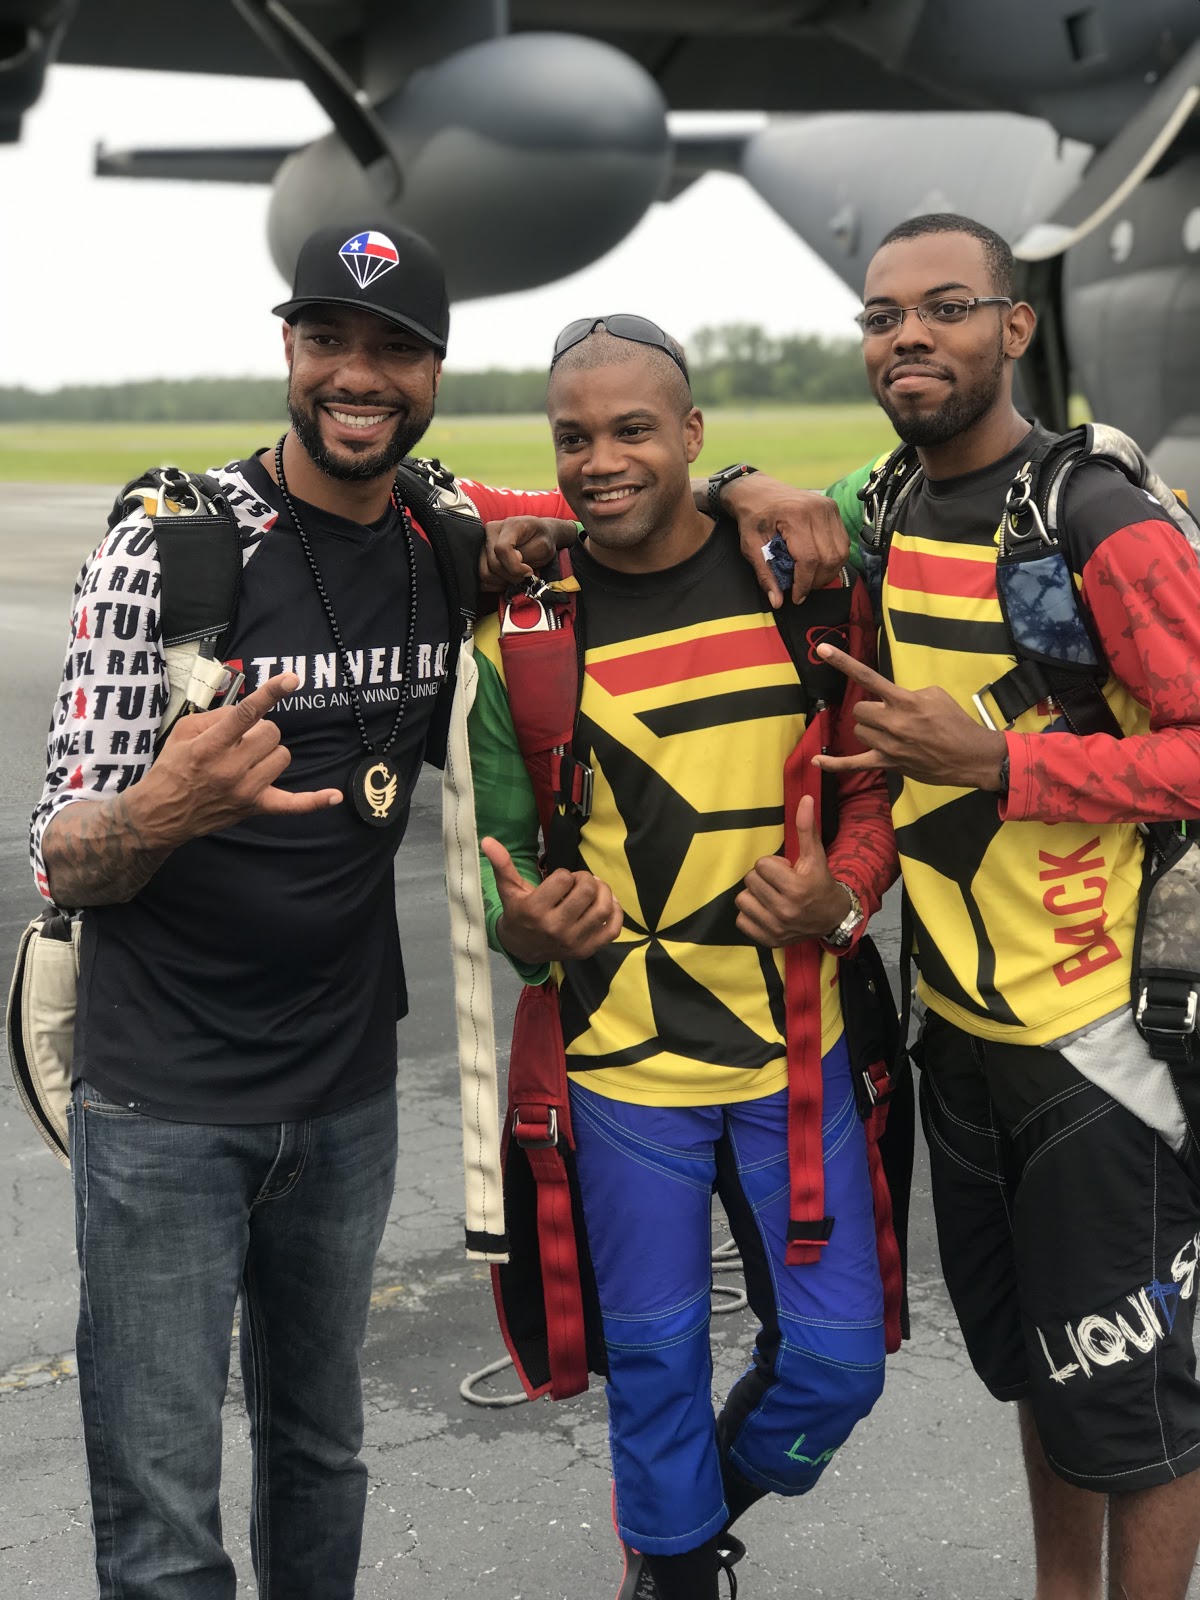  Skydivers  Waz Choudhry ,  Nicholas Walker  and  Will Middlebrooks  flash shaka signs at the camera during the Legacy Flight Academy  Eyes Above the Horizon  flight camp in Valdosta, GA.  Photo courtesy of Danielle Williams.  